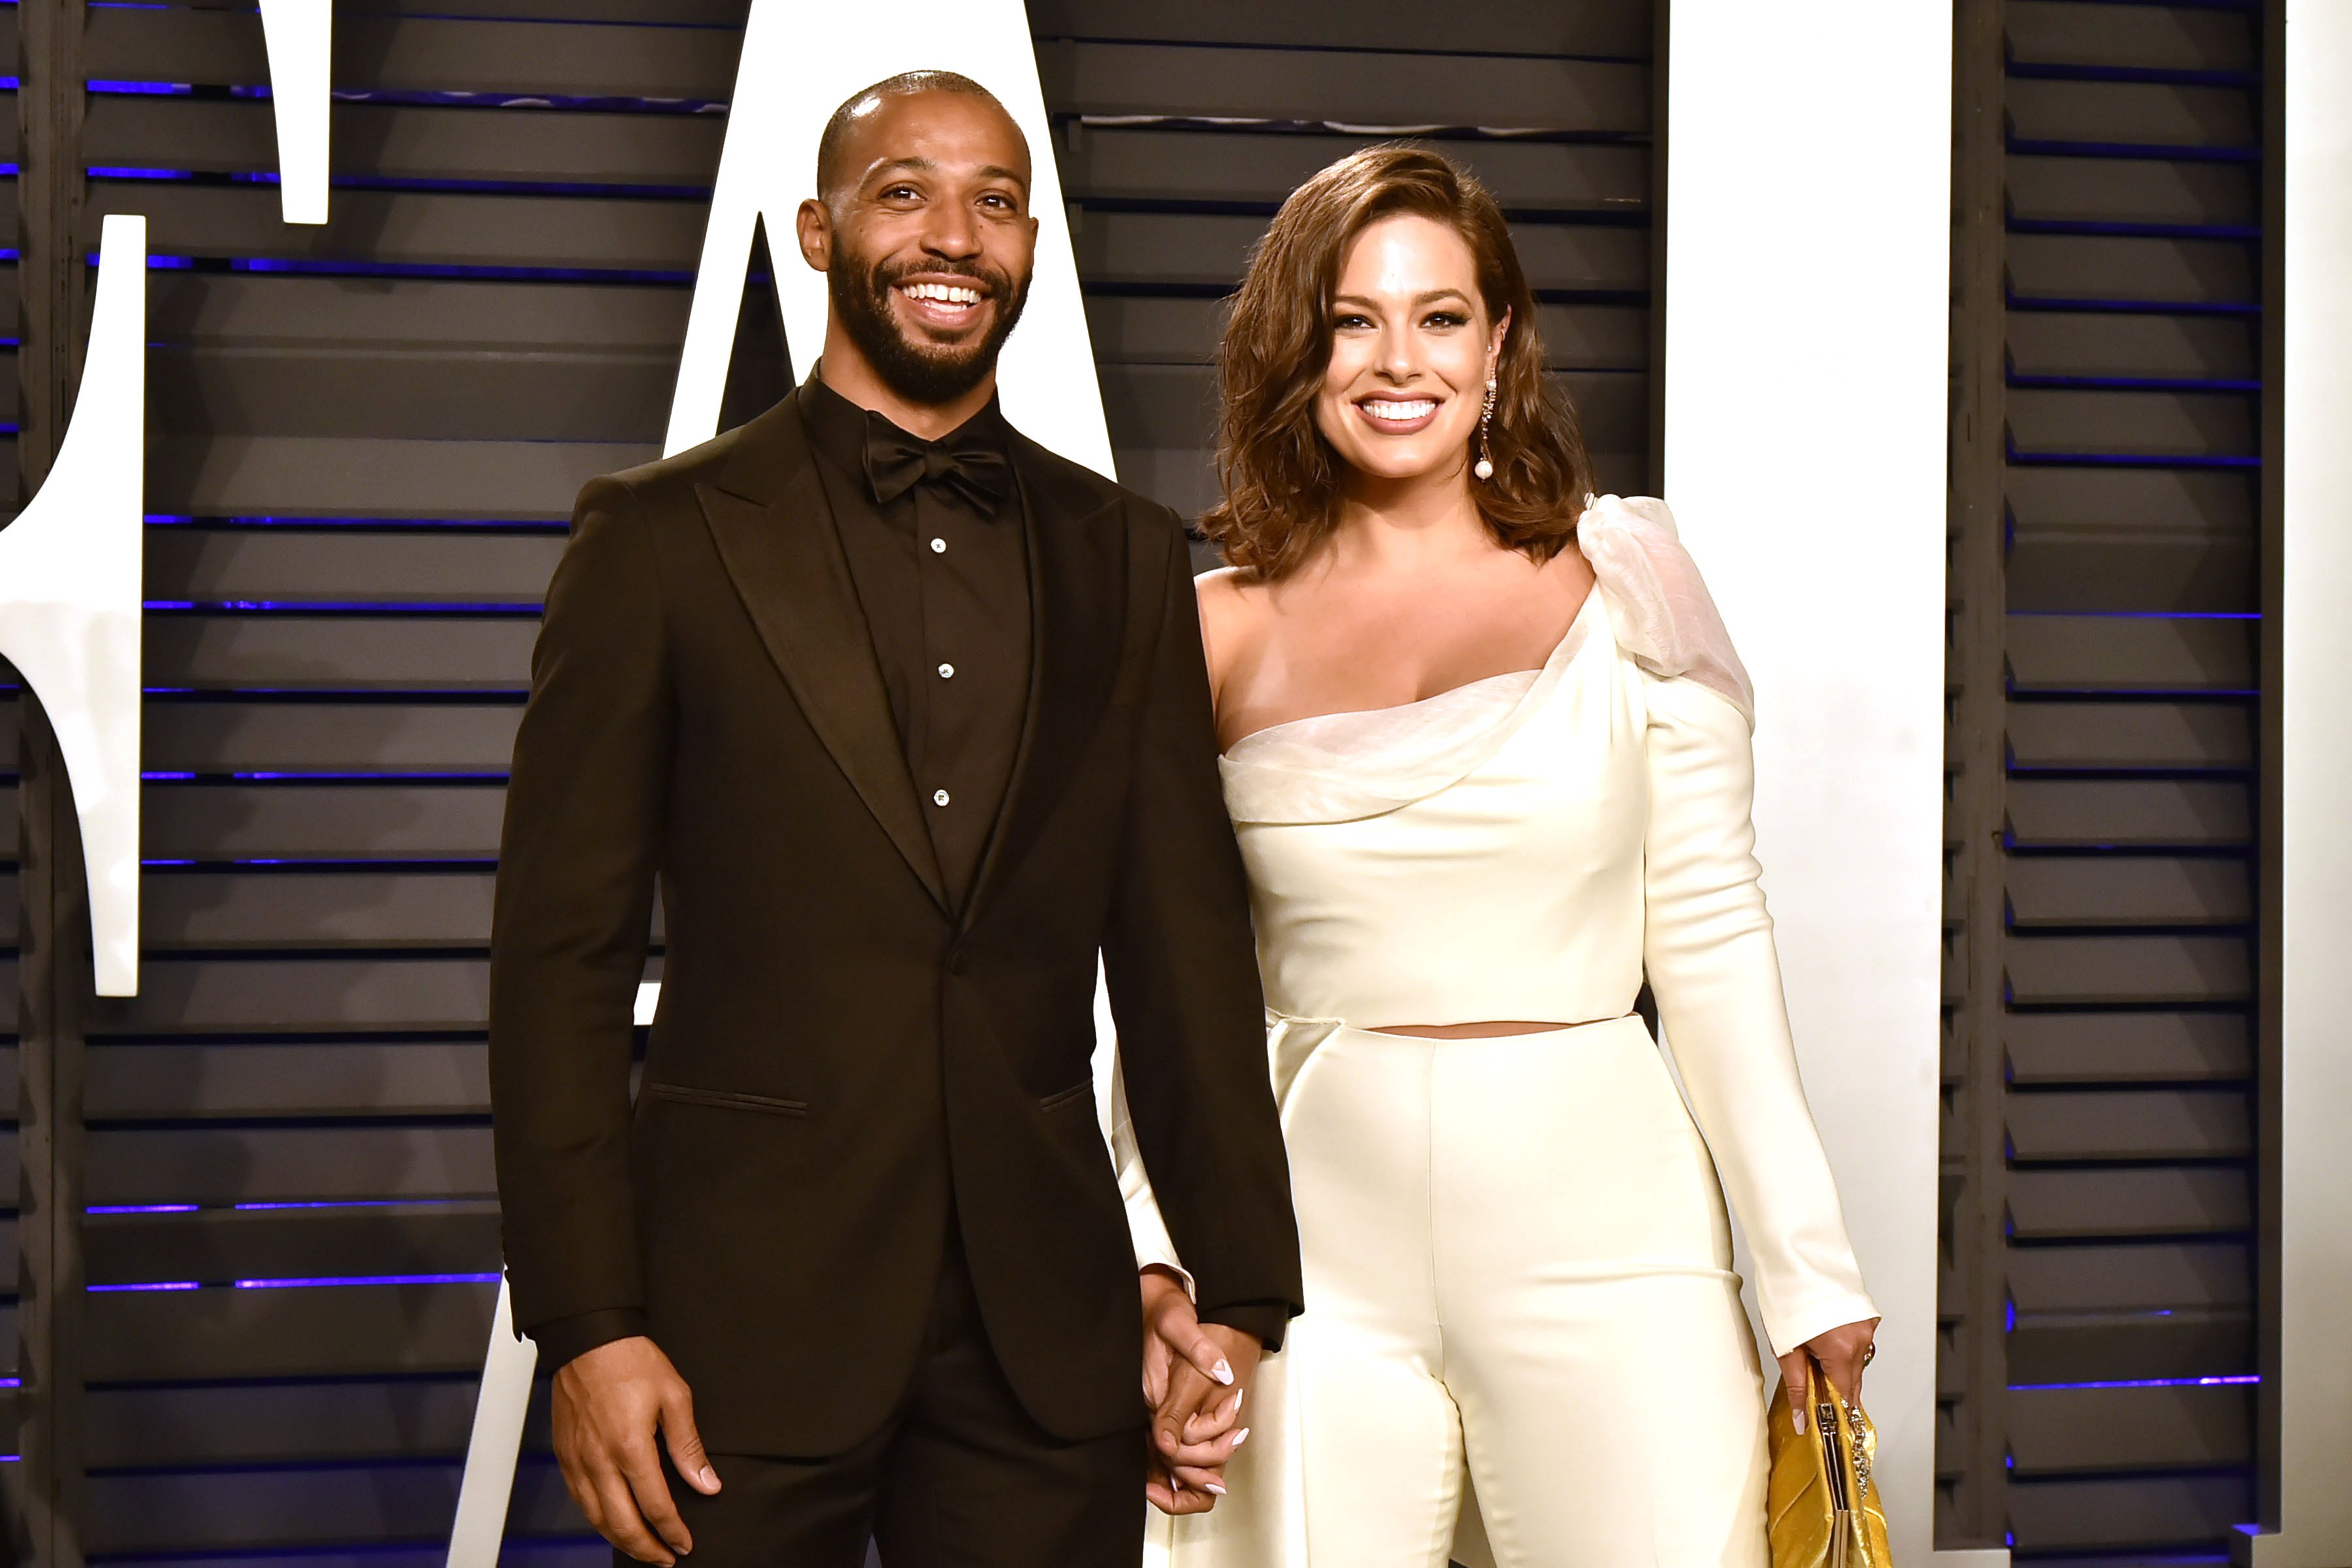 Justin Ervin and Ashley Graham attend the 2019 Vanity Fair Oscar Party on February 24, 2019. | Photo: Getty Images